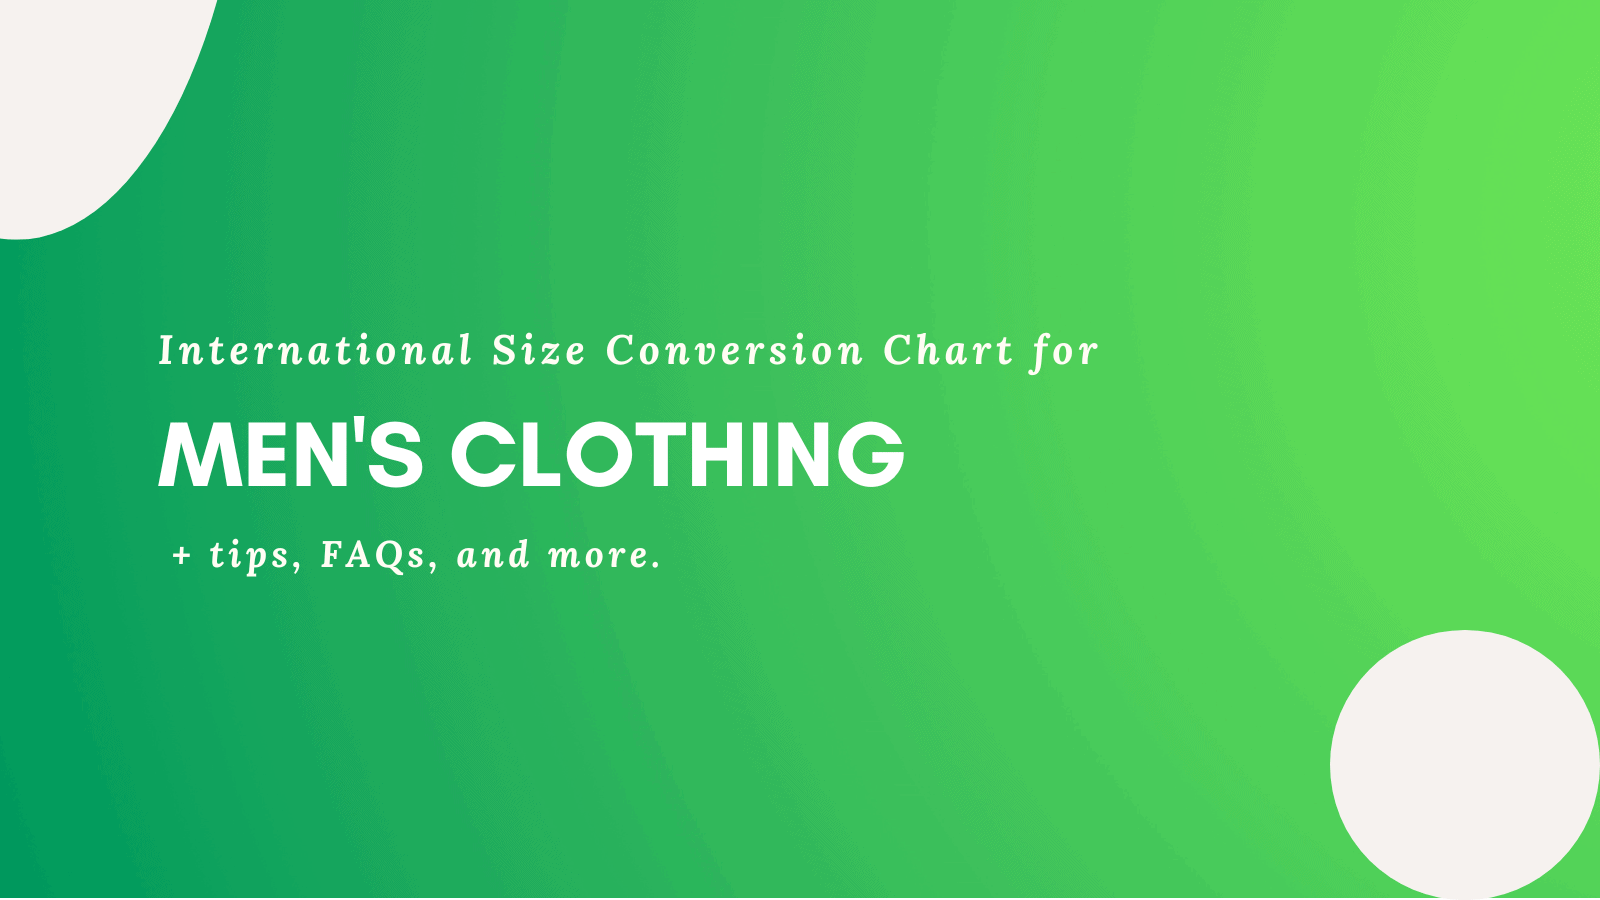 Male To Female Pants Size Conversion Factory Sale - www.ladyg.co.uk  1694321103